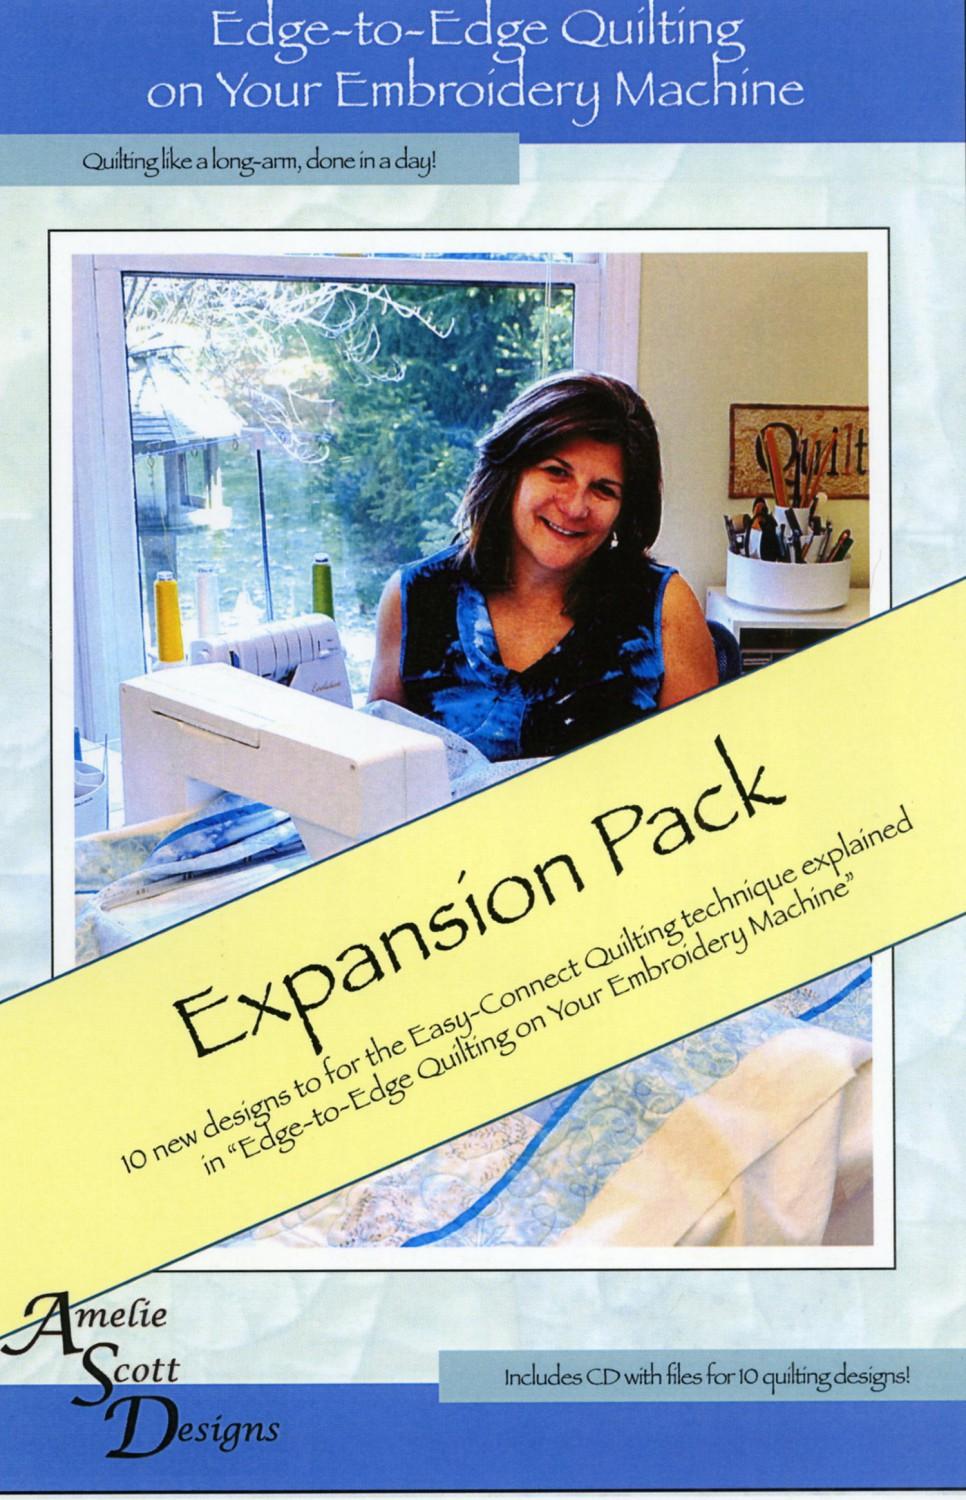 Edge-to-Edge Quilting Expansion Pack 01